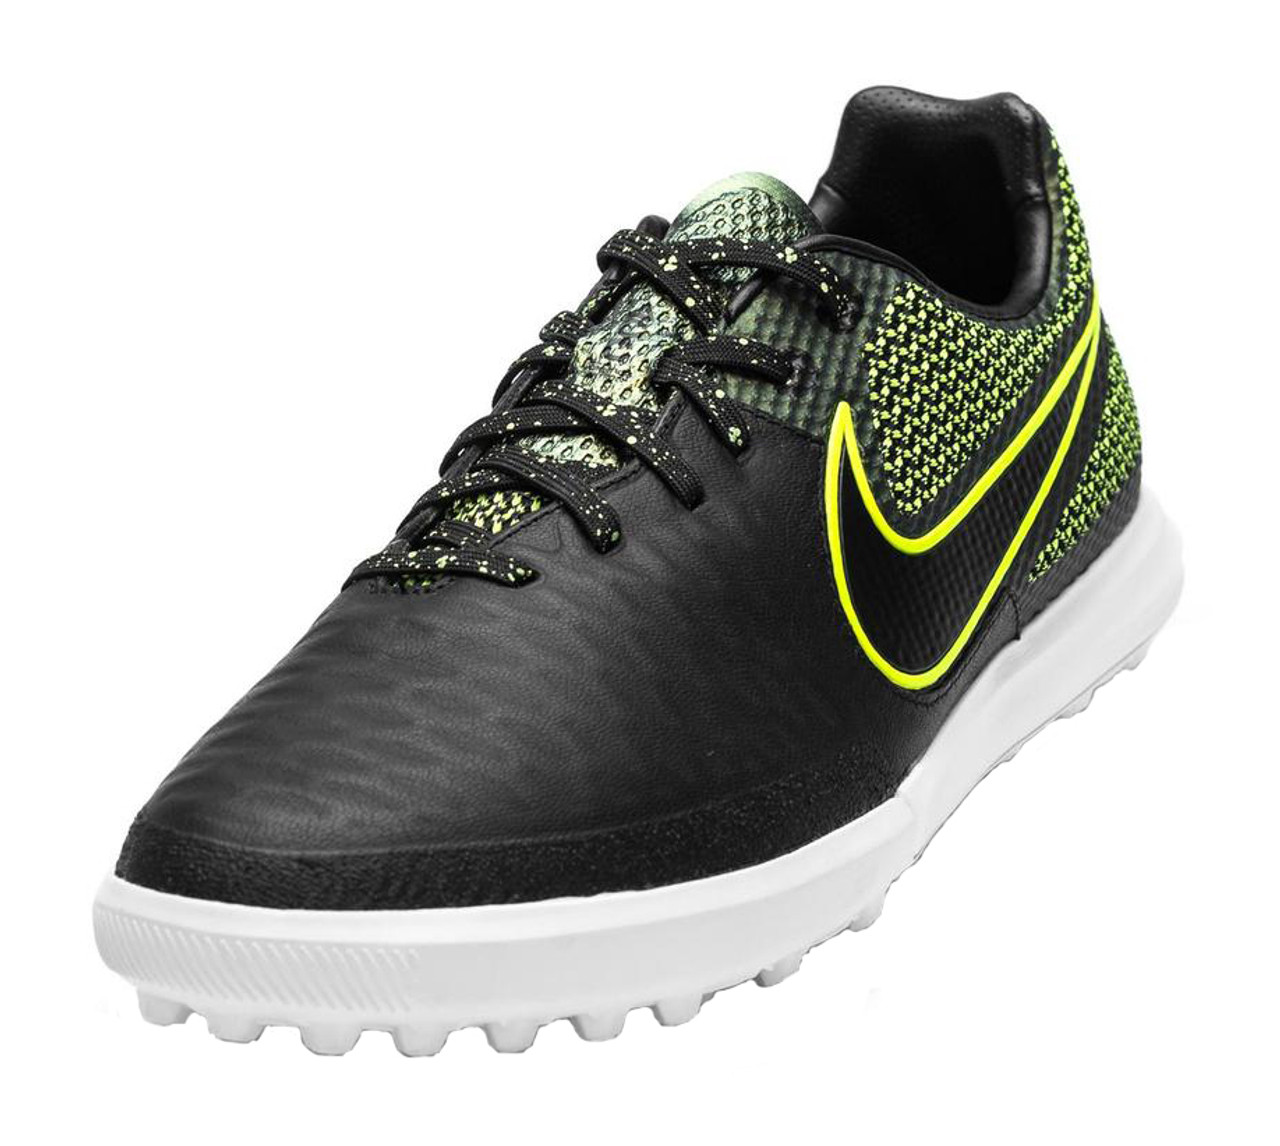 Find Great Deals on magista nike Compare Prices & Shop